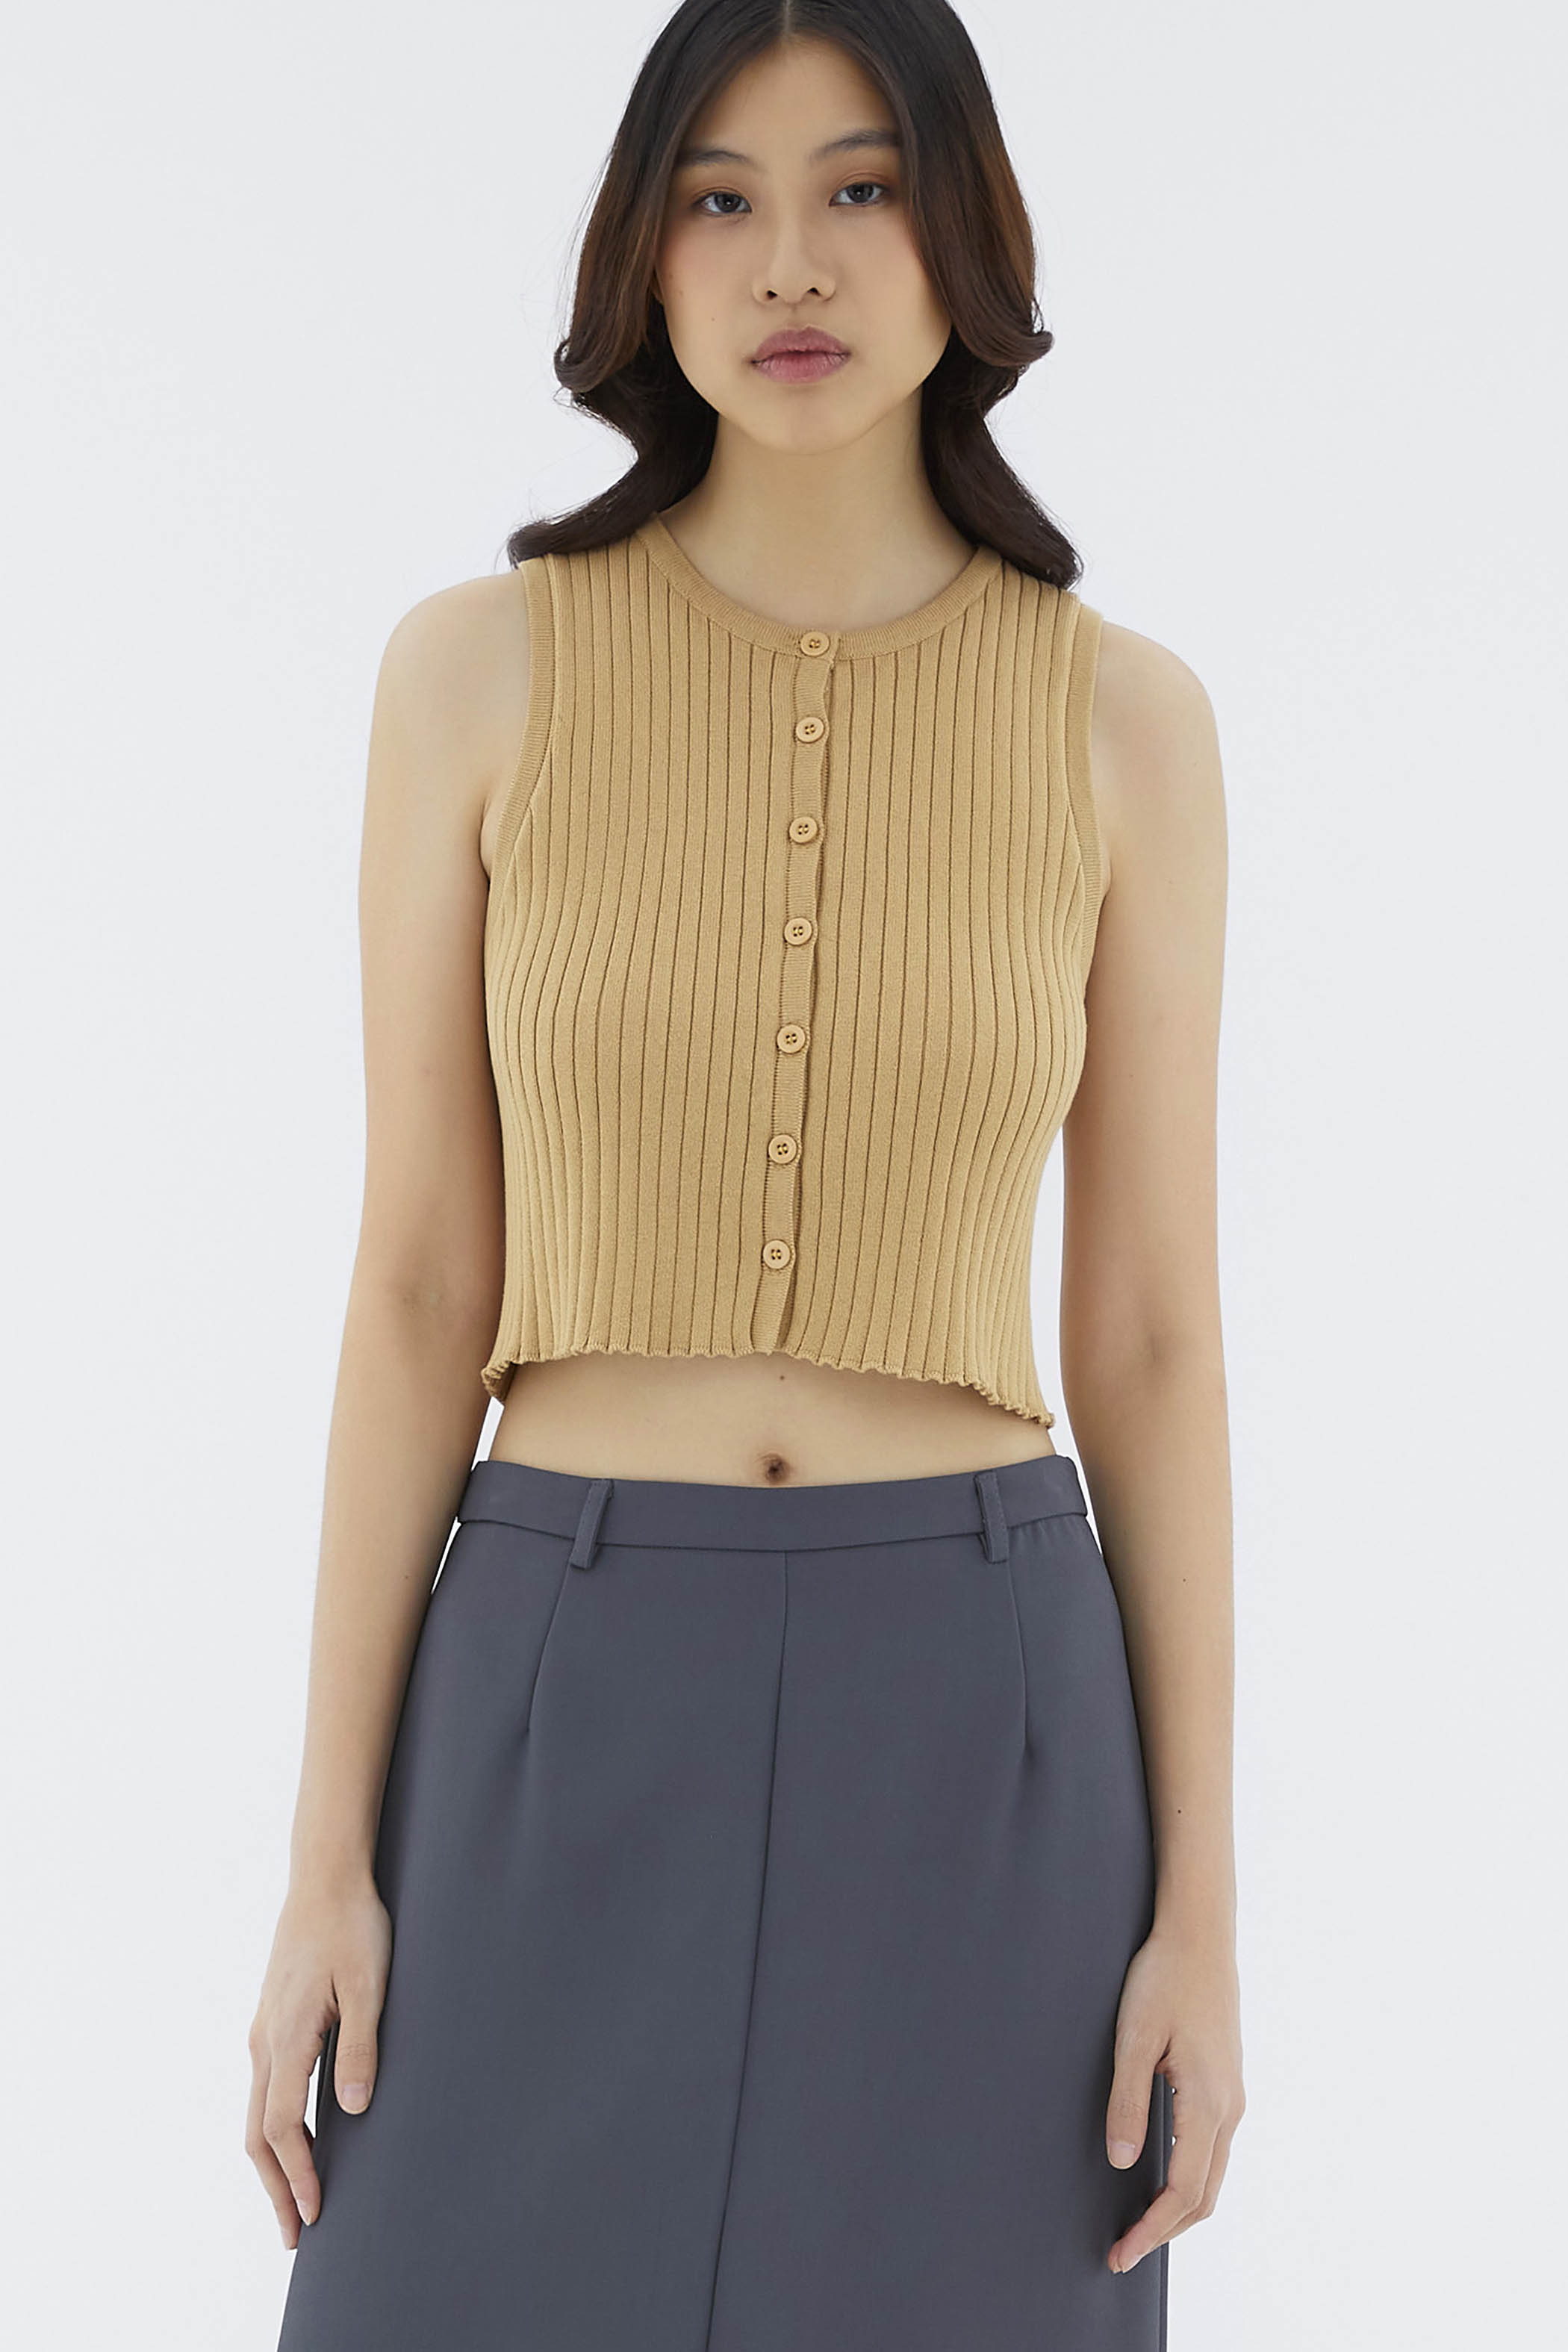 Soft Knit Ribbed Fitted Pants - Orchid hush